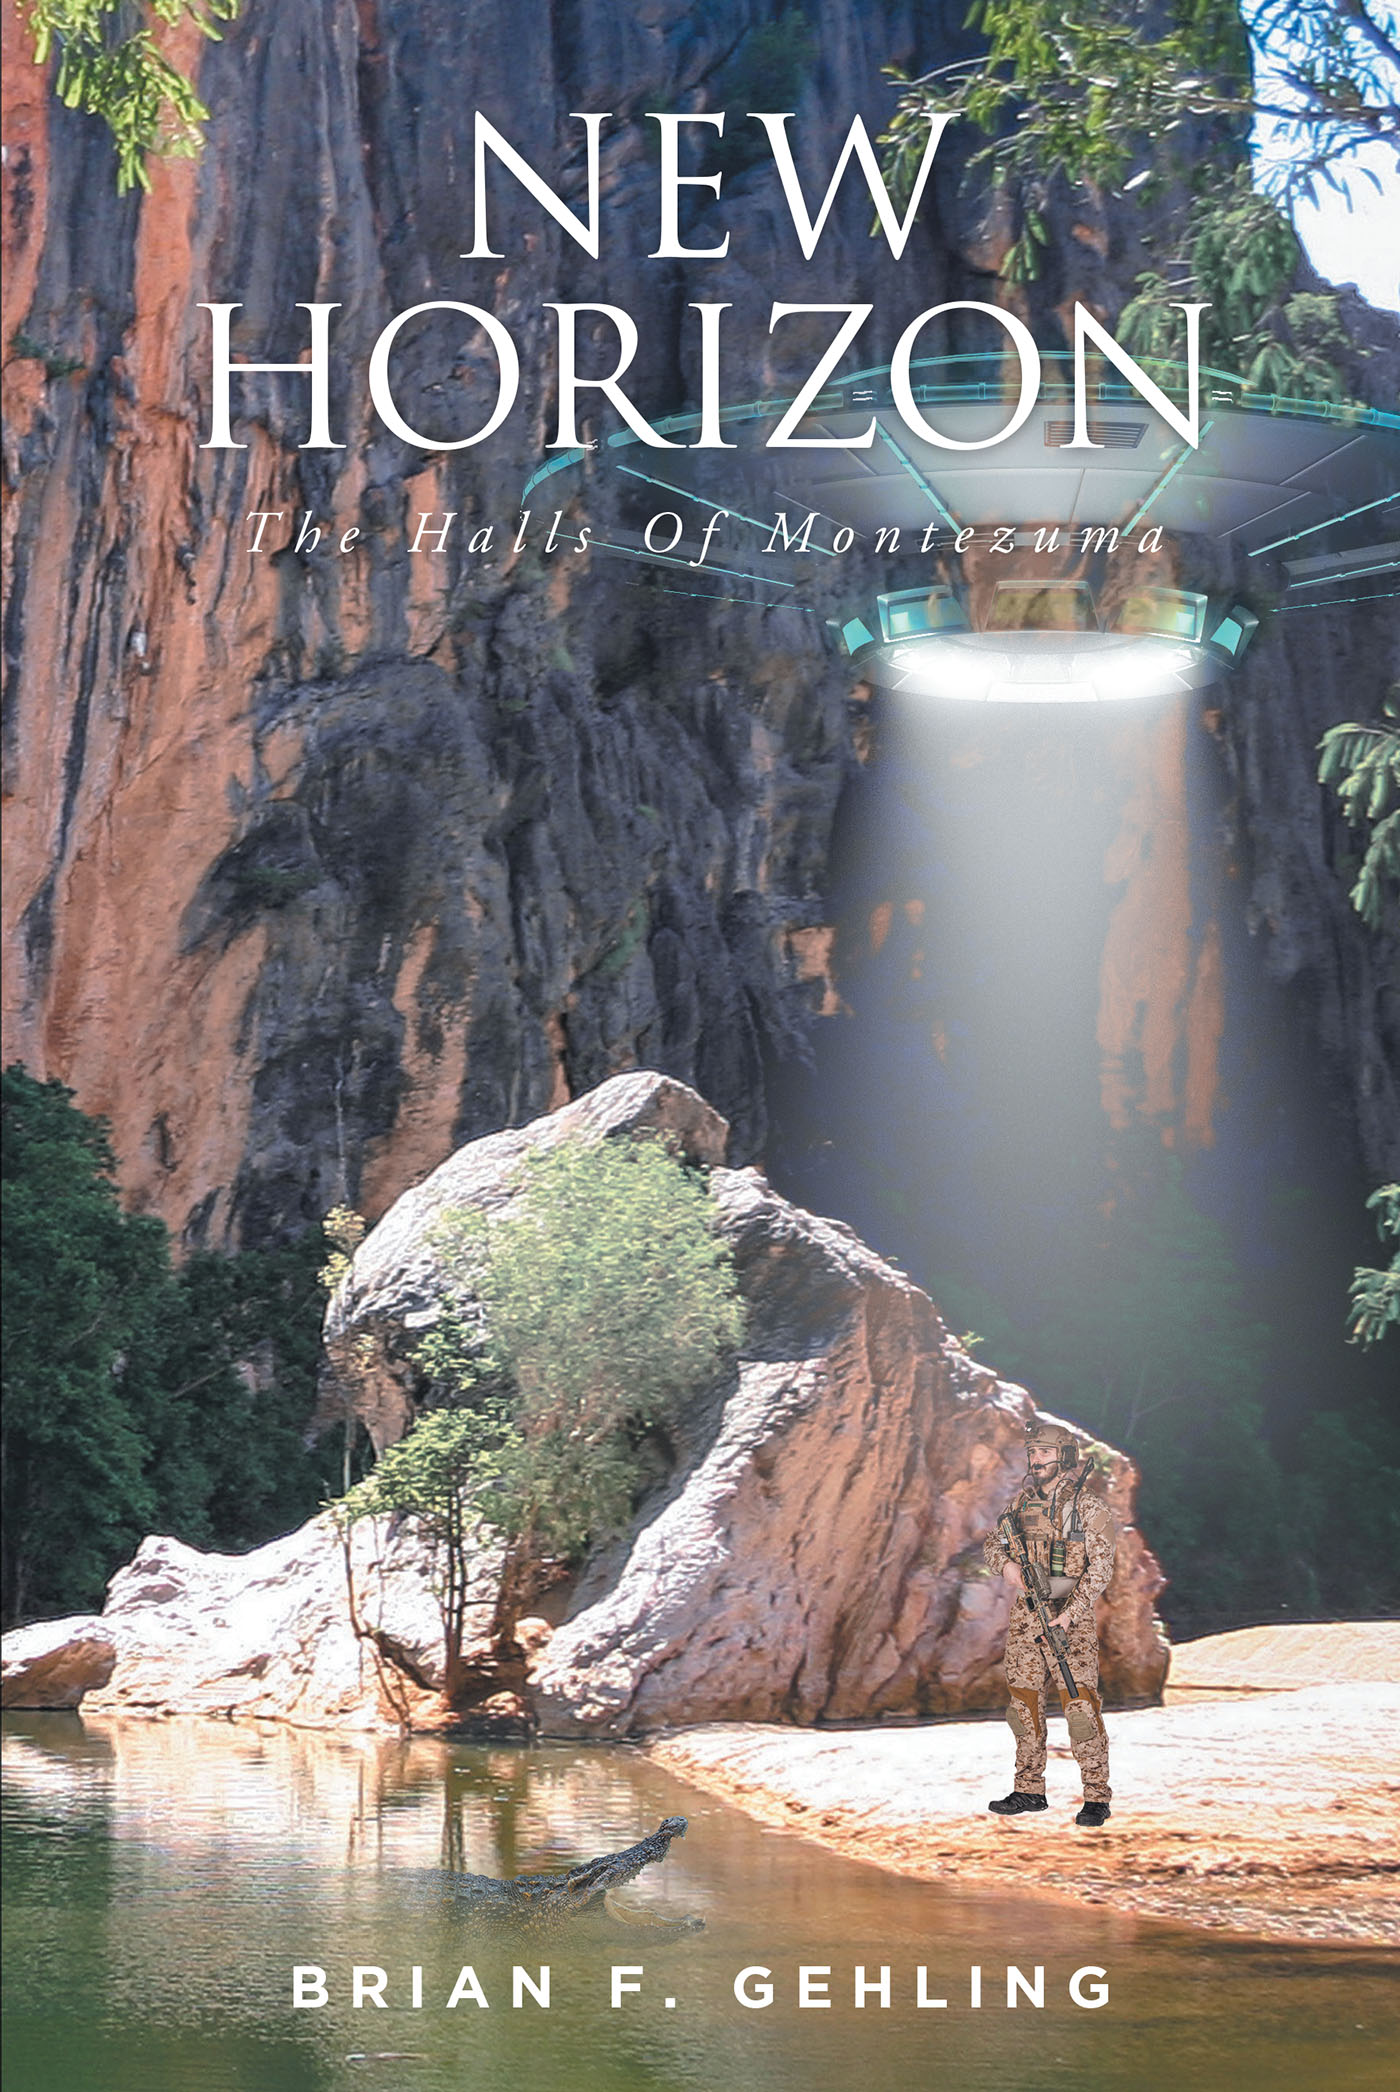 Brian F. Gehling’s New Book "New Horizon: the Halls of Montezuma" Follows the Crew of a Space Cruiser Who Somehow Wind Up on an Unknown Planet Light-Years Away from Home